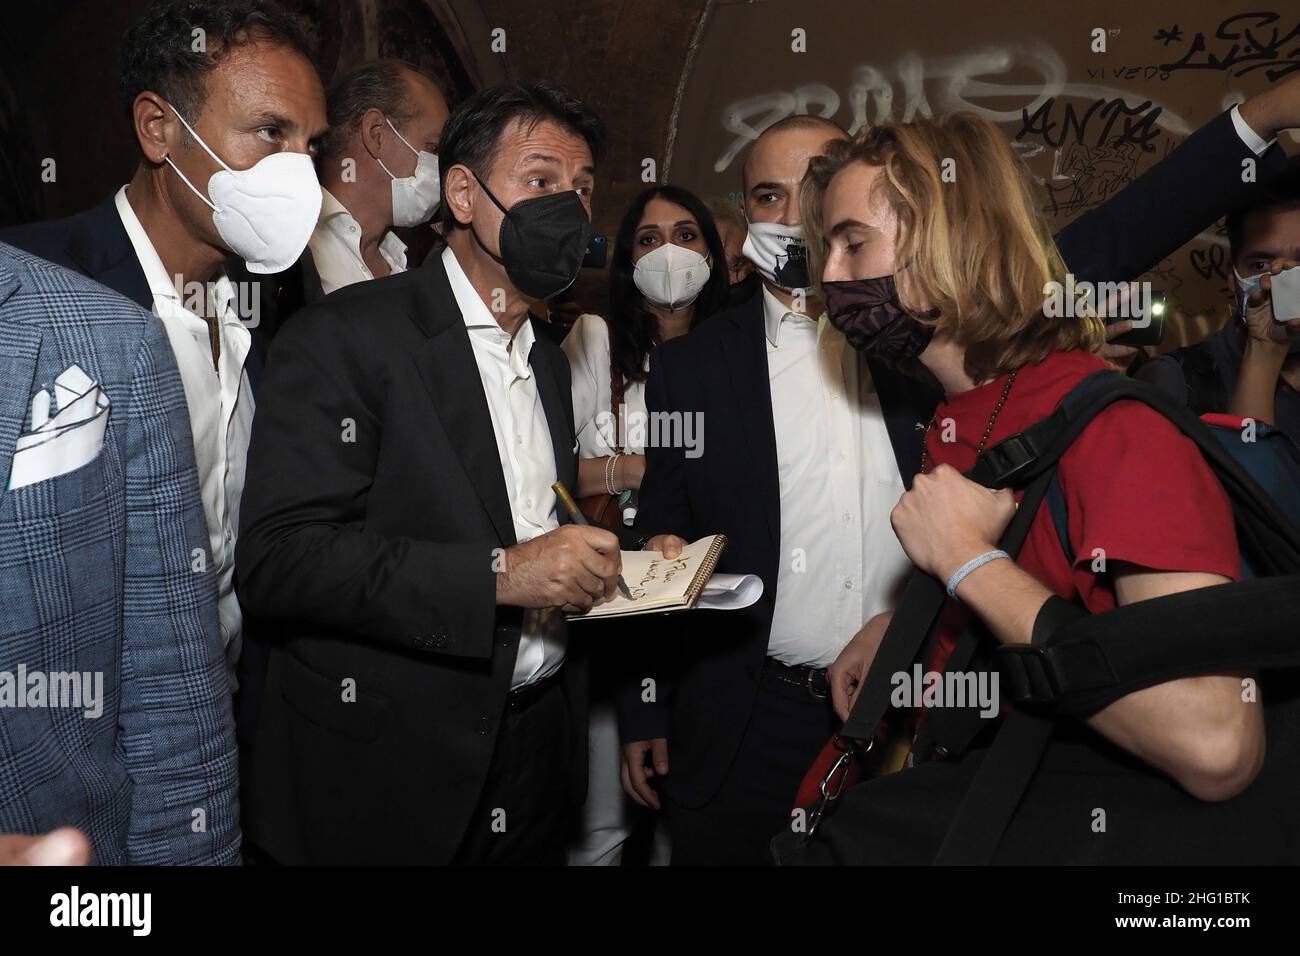 Michele Nucci/LaPresse September 10, 2021 - Bologna, Italy news Former Prime Minister Giuseppe Conte with Foreign Minister Luigi Di Maio and Bologna mayoral candidate Matteo Lepore on a tour of the city Stock Photo